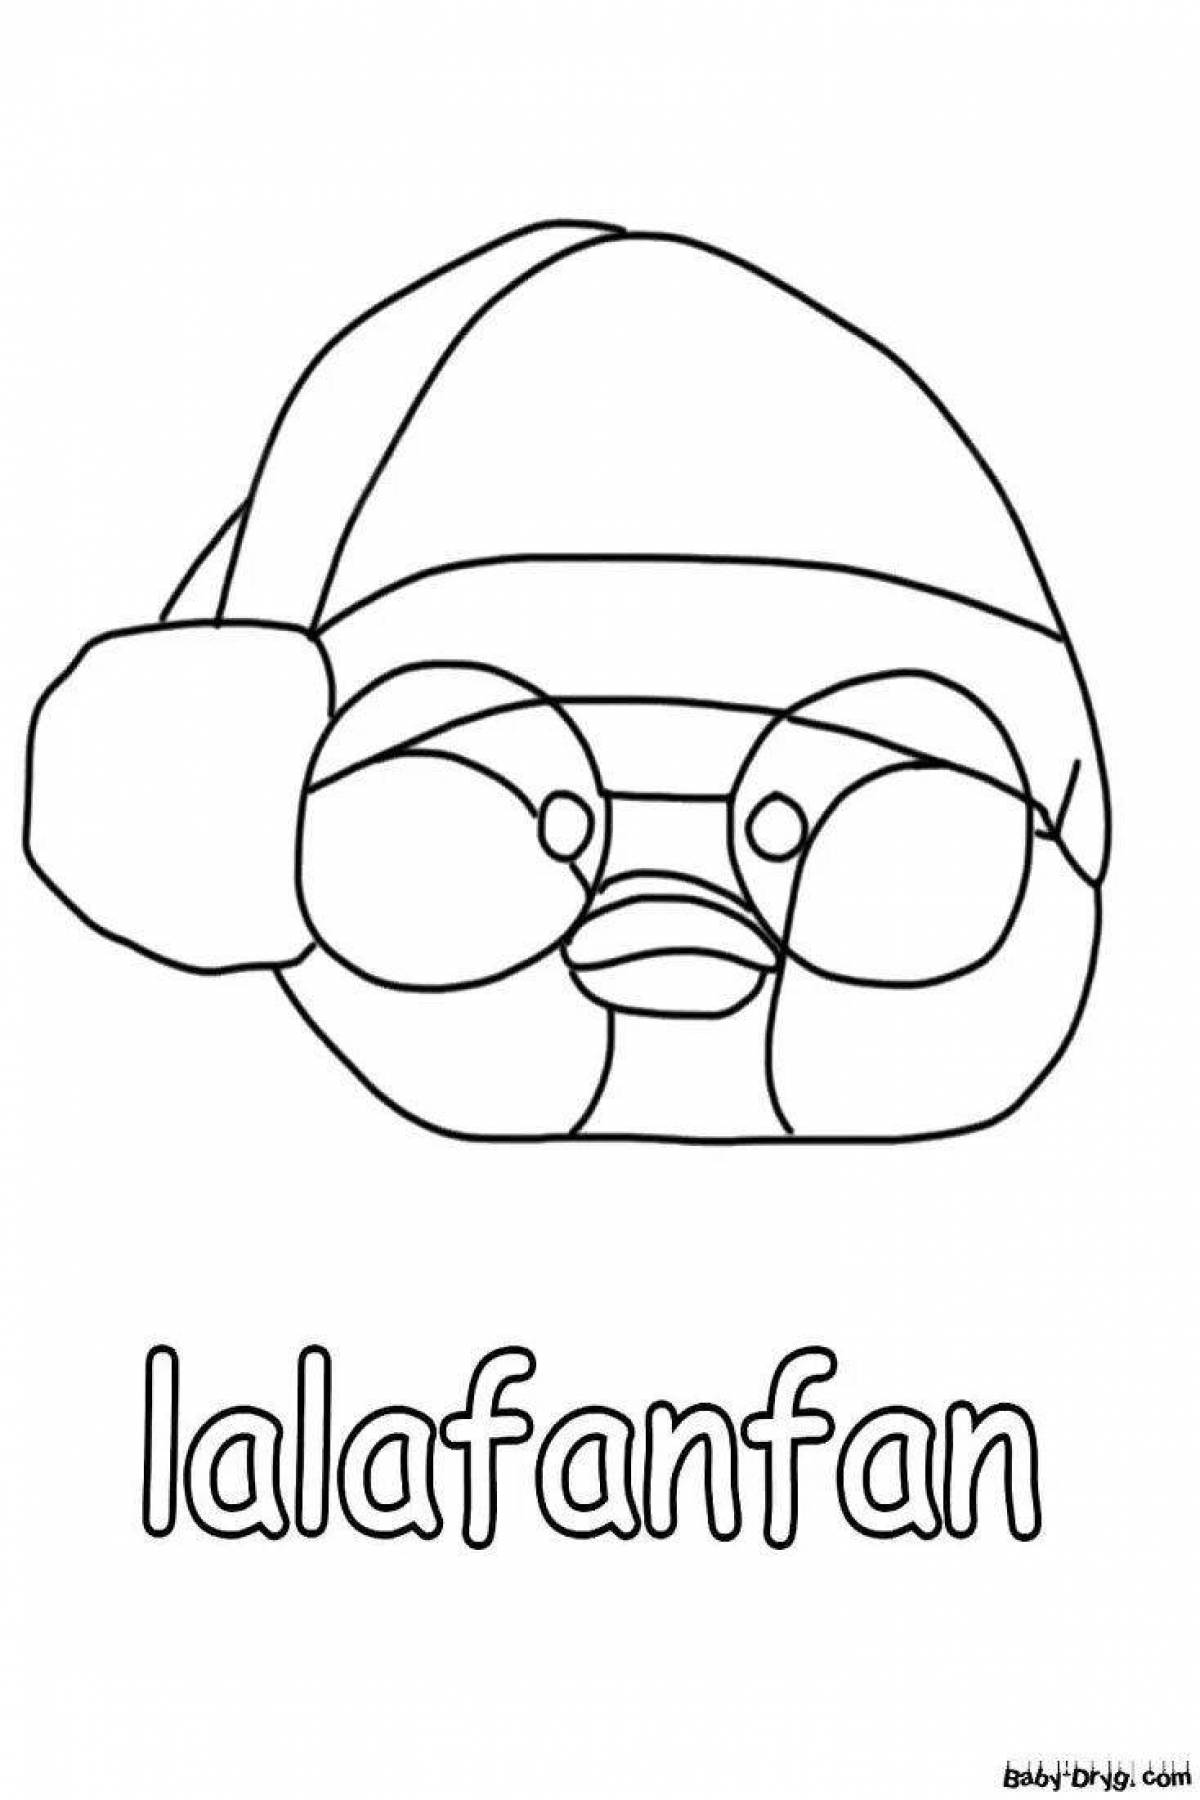 Lalafan duck food coloring page